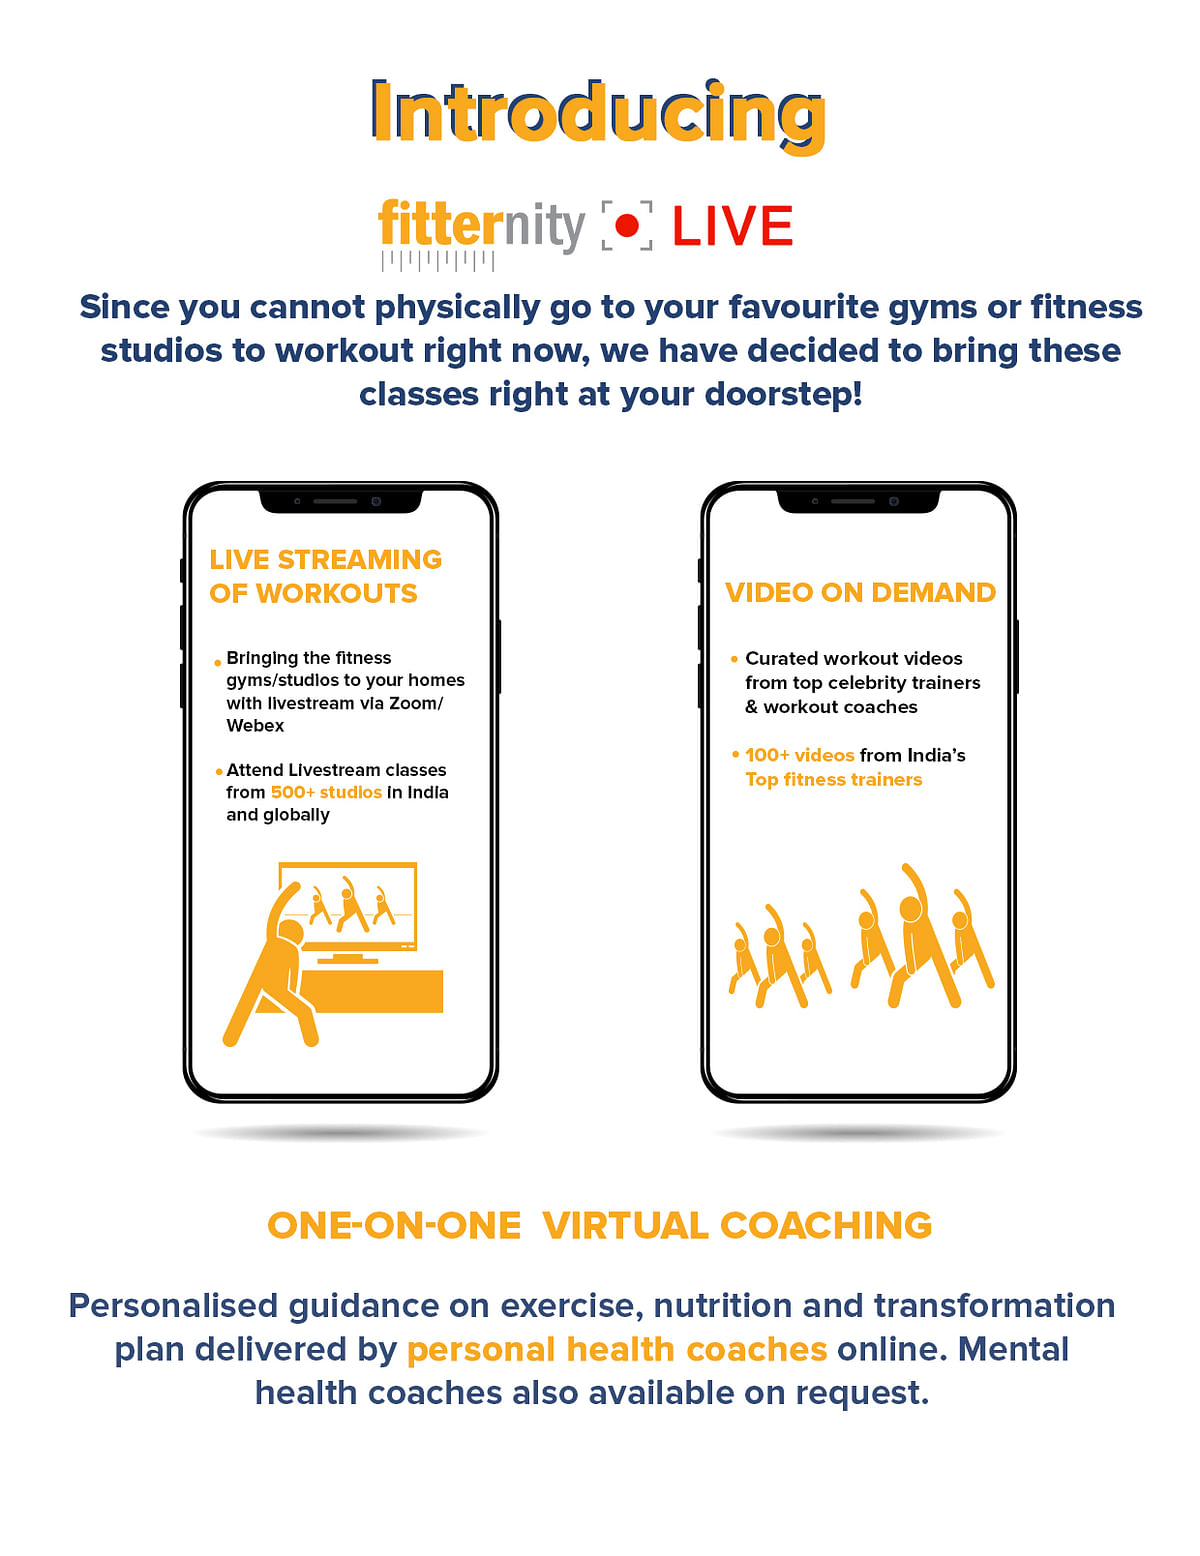 Fitternity launches new products amid lockdown to meet evolving consumer needs